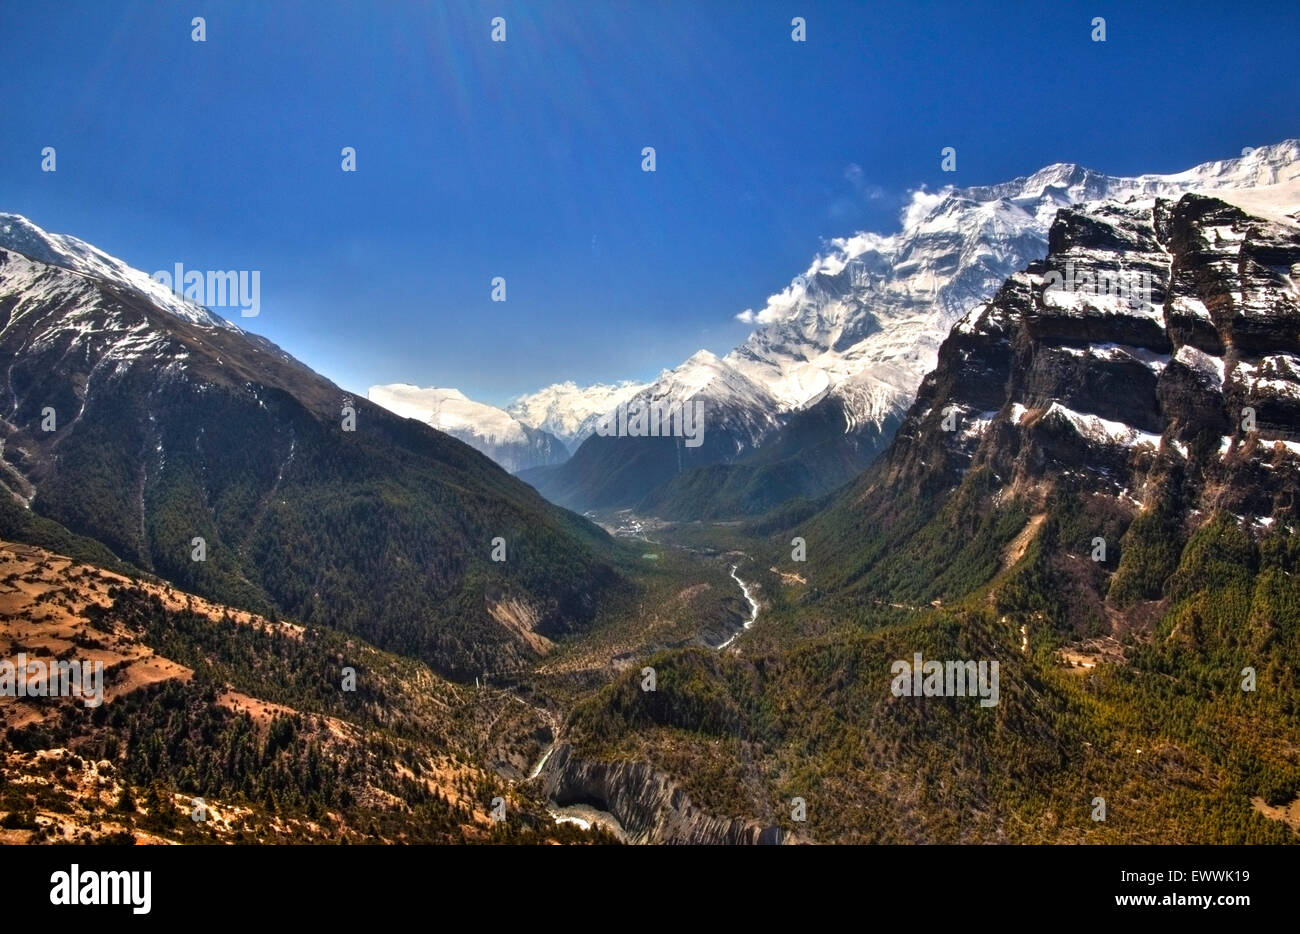 Amazing view of the Himalayas from Upper Pisang on the Annapurna circuit, Nepal Stock Photo